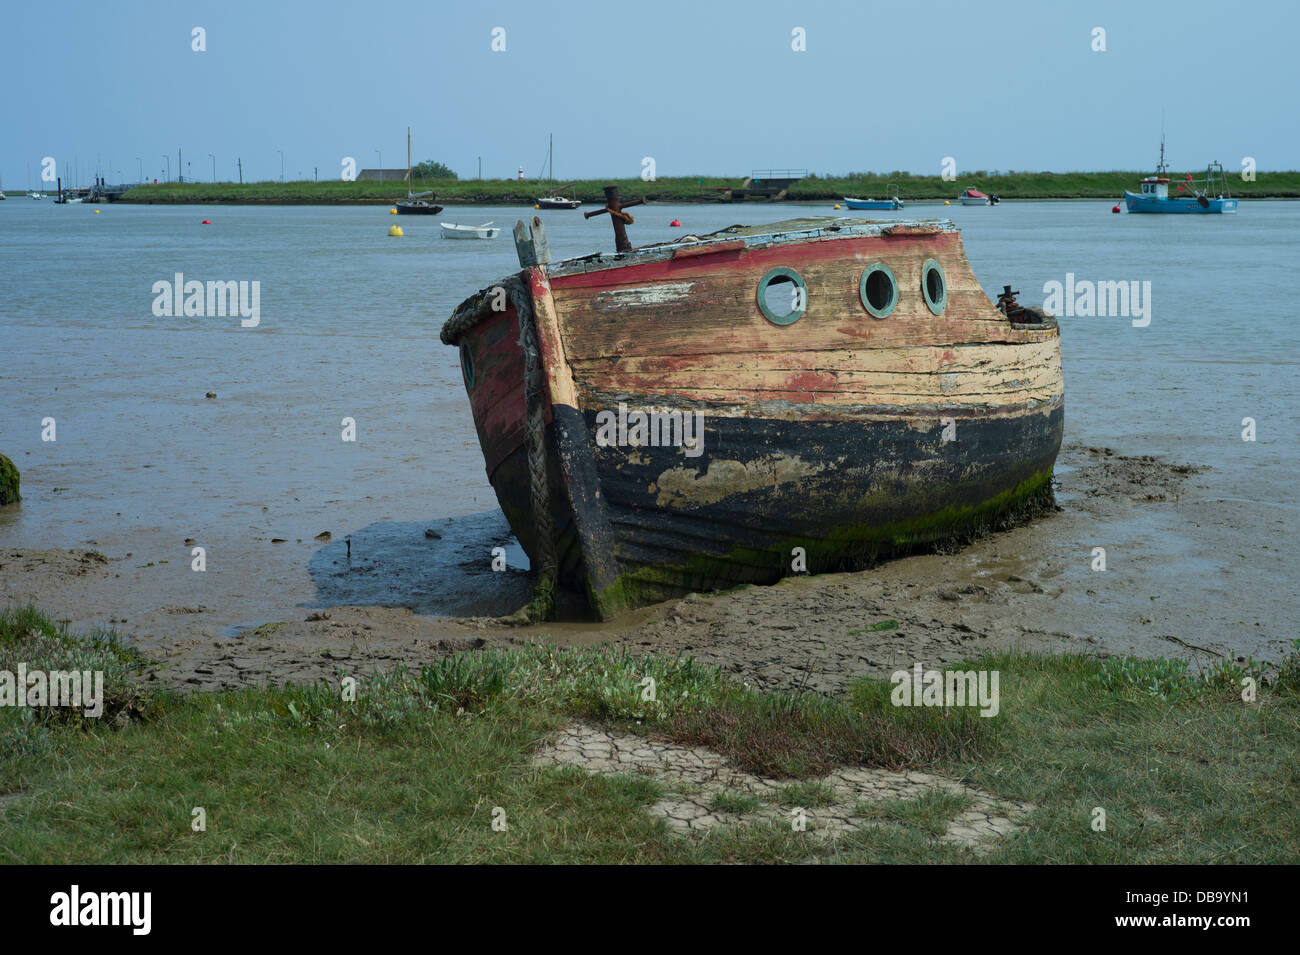 Orford, Suffolk, England, July 2013. Stock Photo